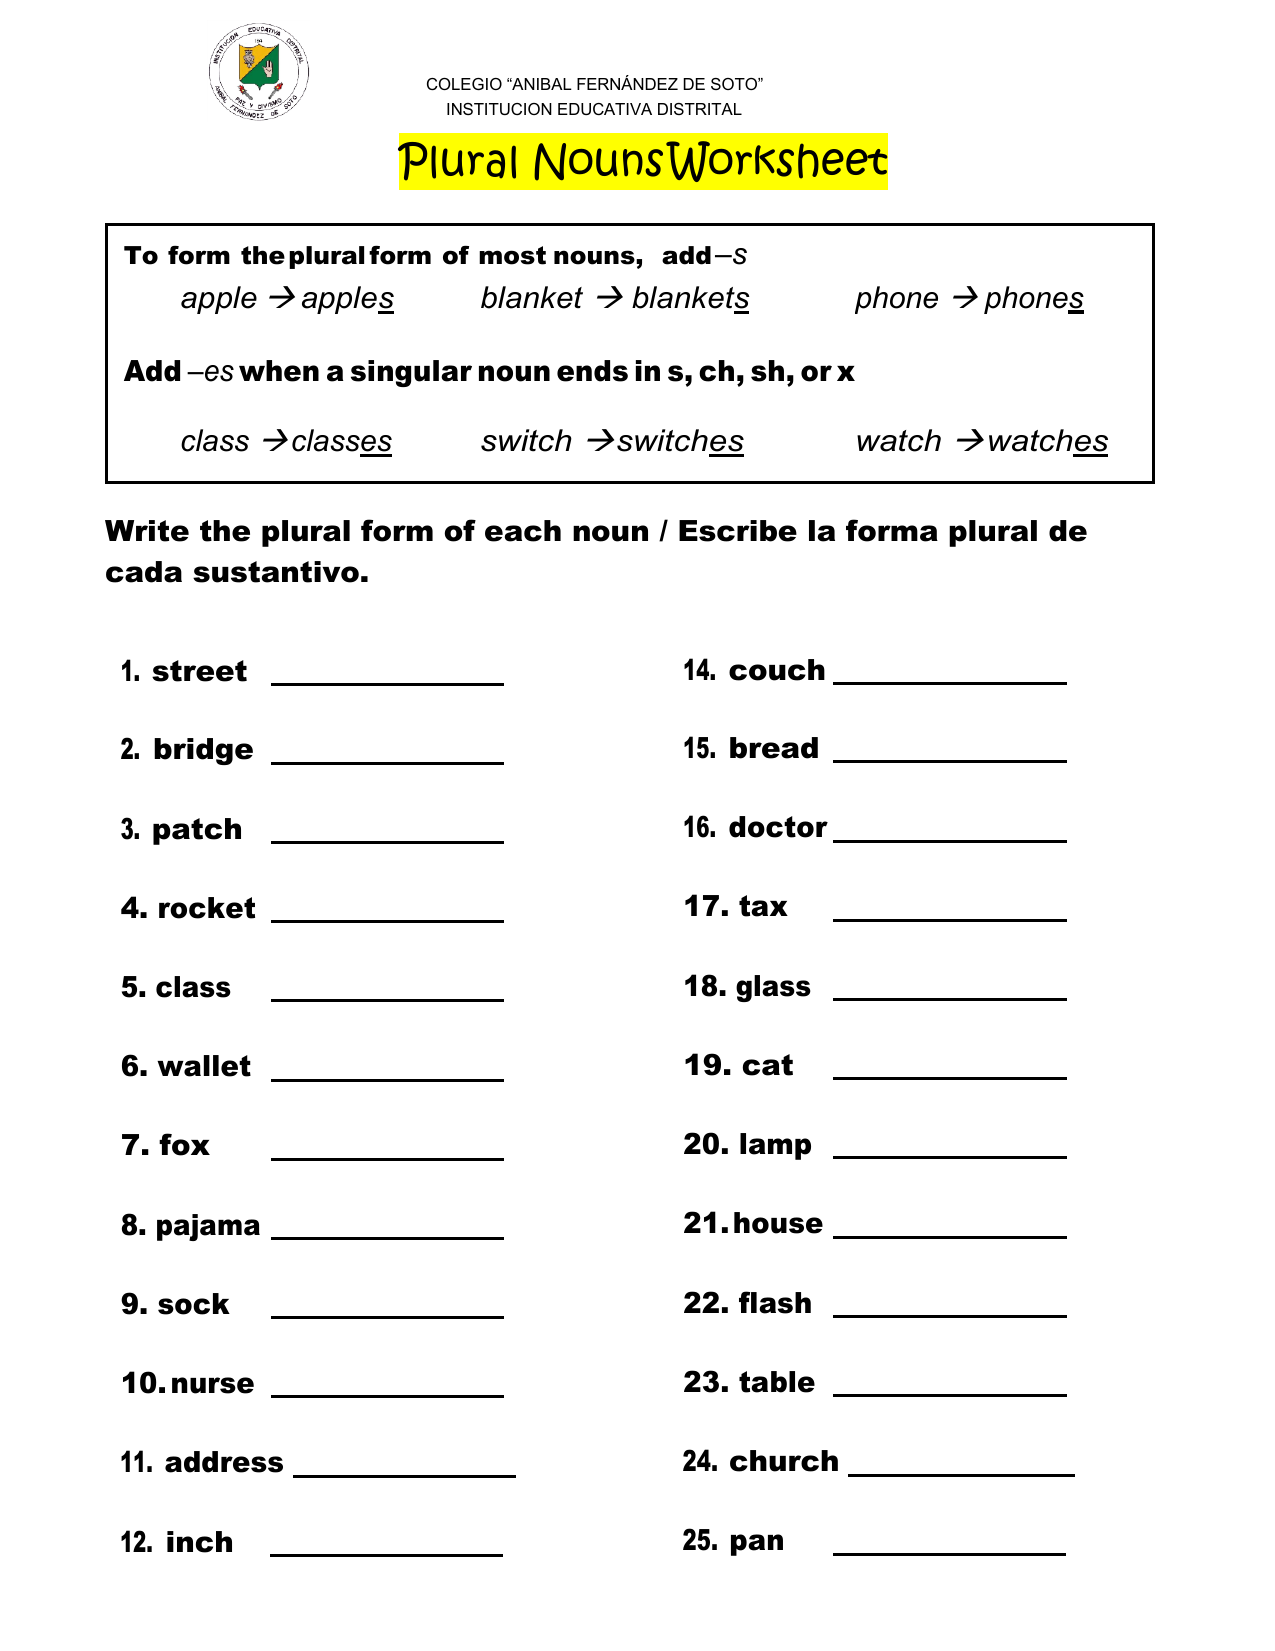 Free Printable Worksheets On Forming Plurals Of Nouns Printable Forms Free Online